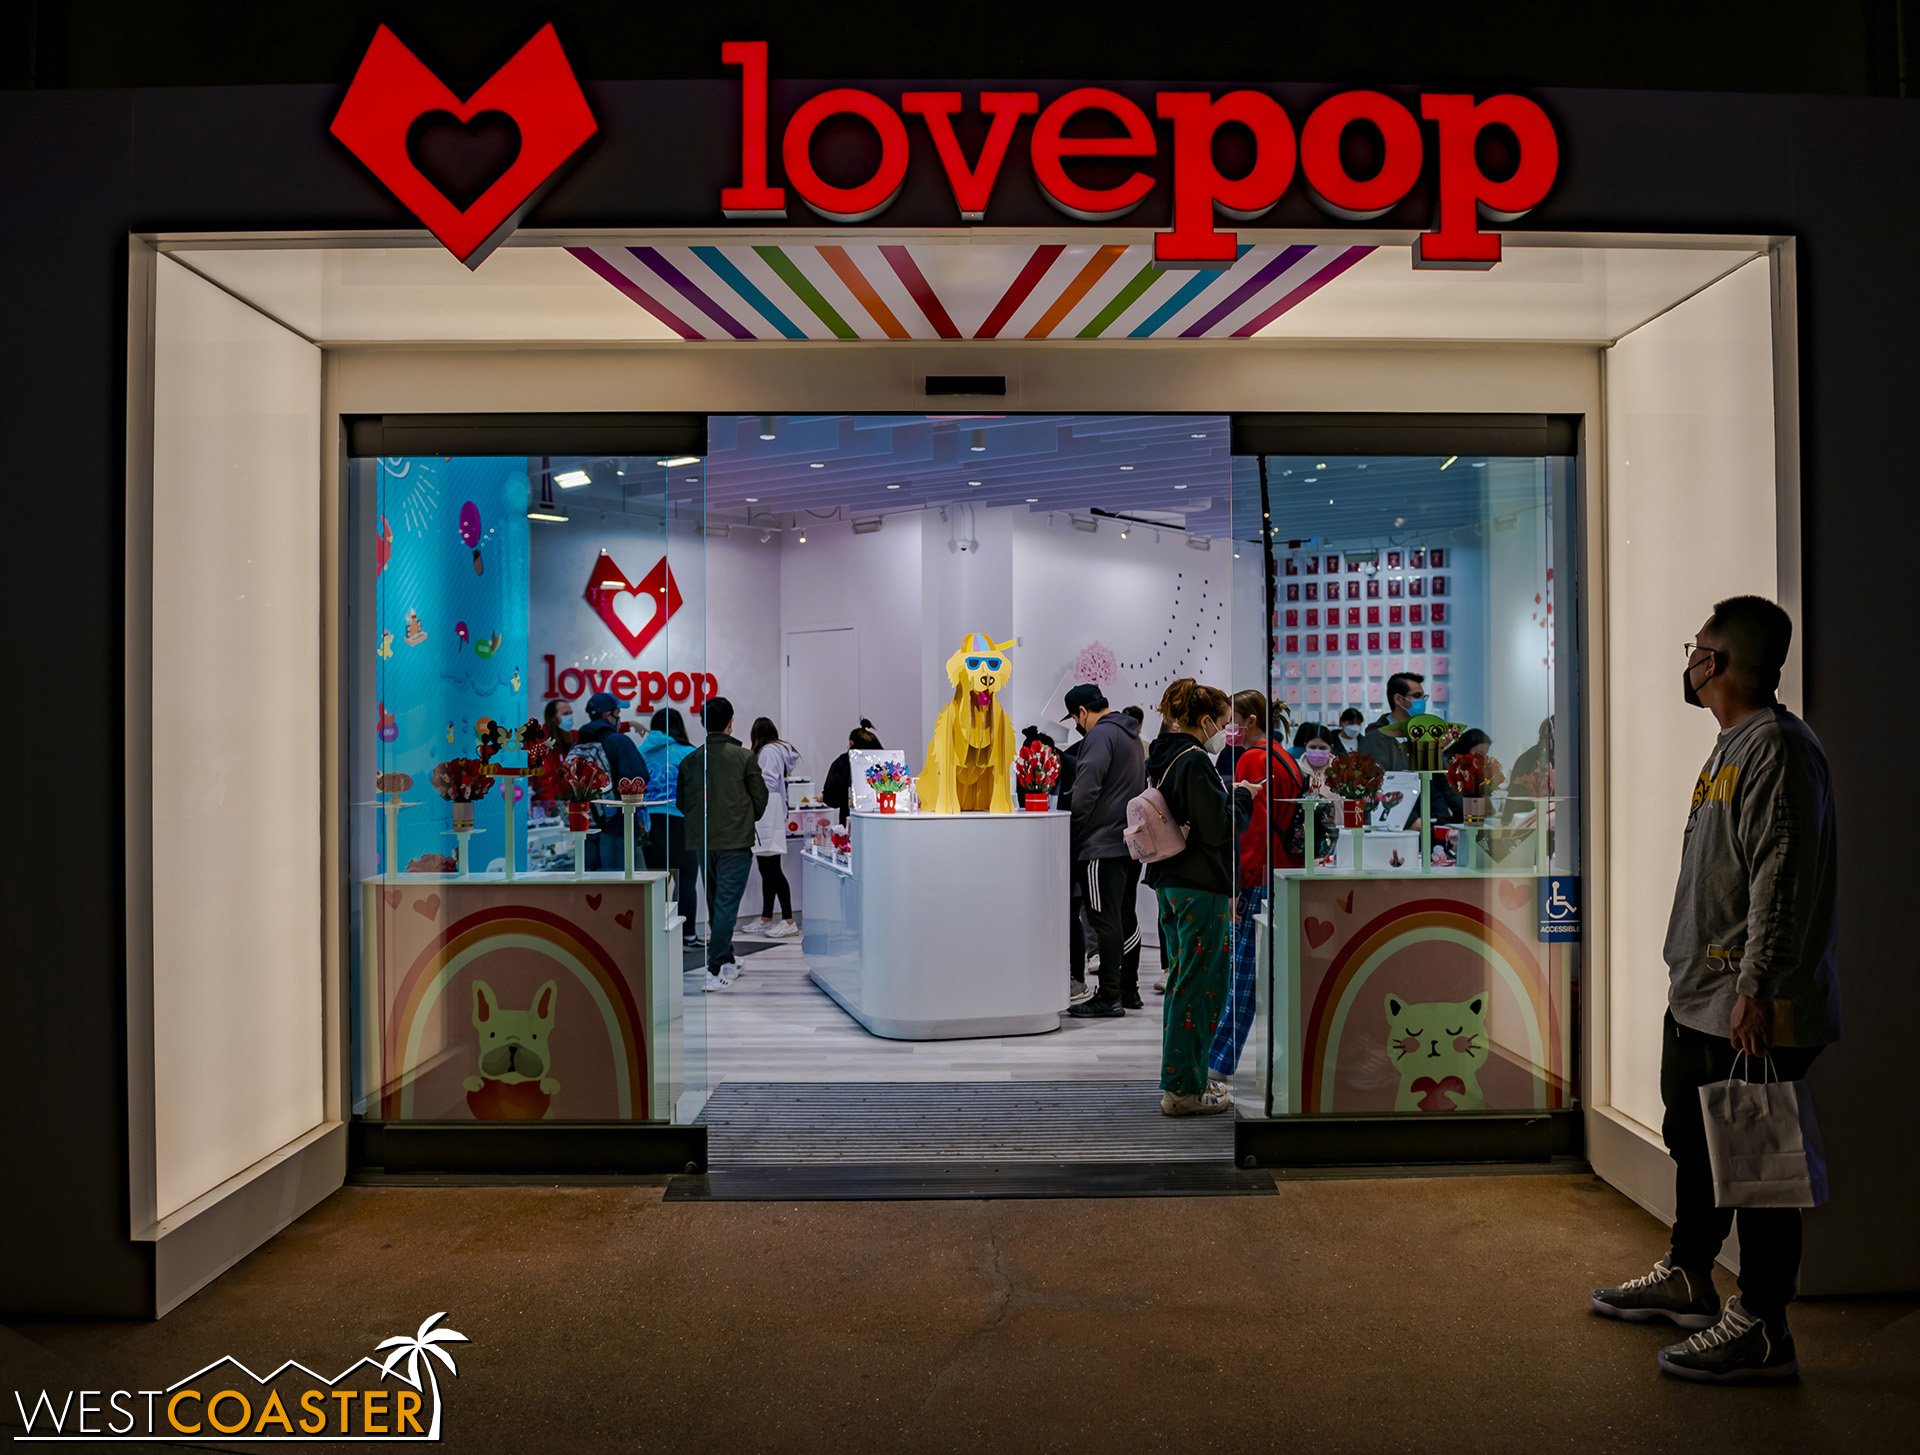  Right next door, also opening last month, is a Lovepop store. 